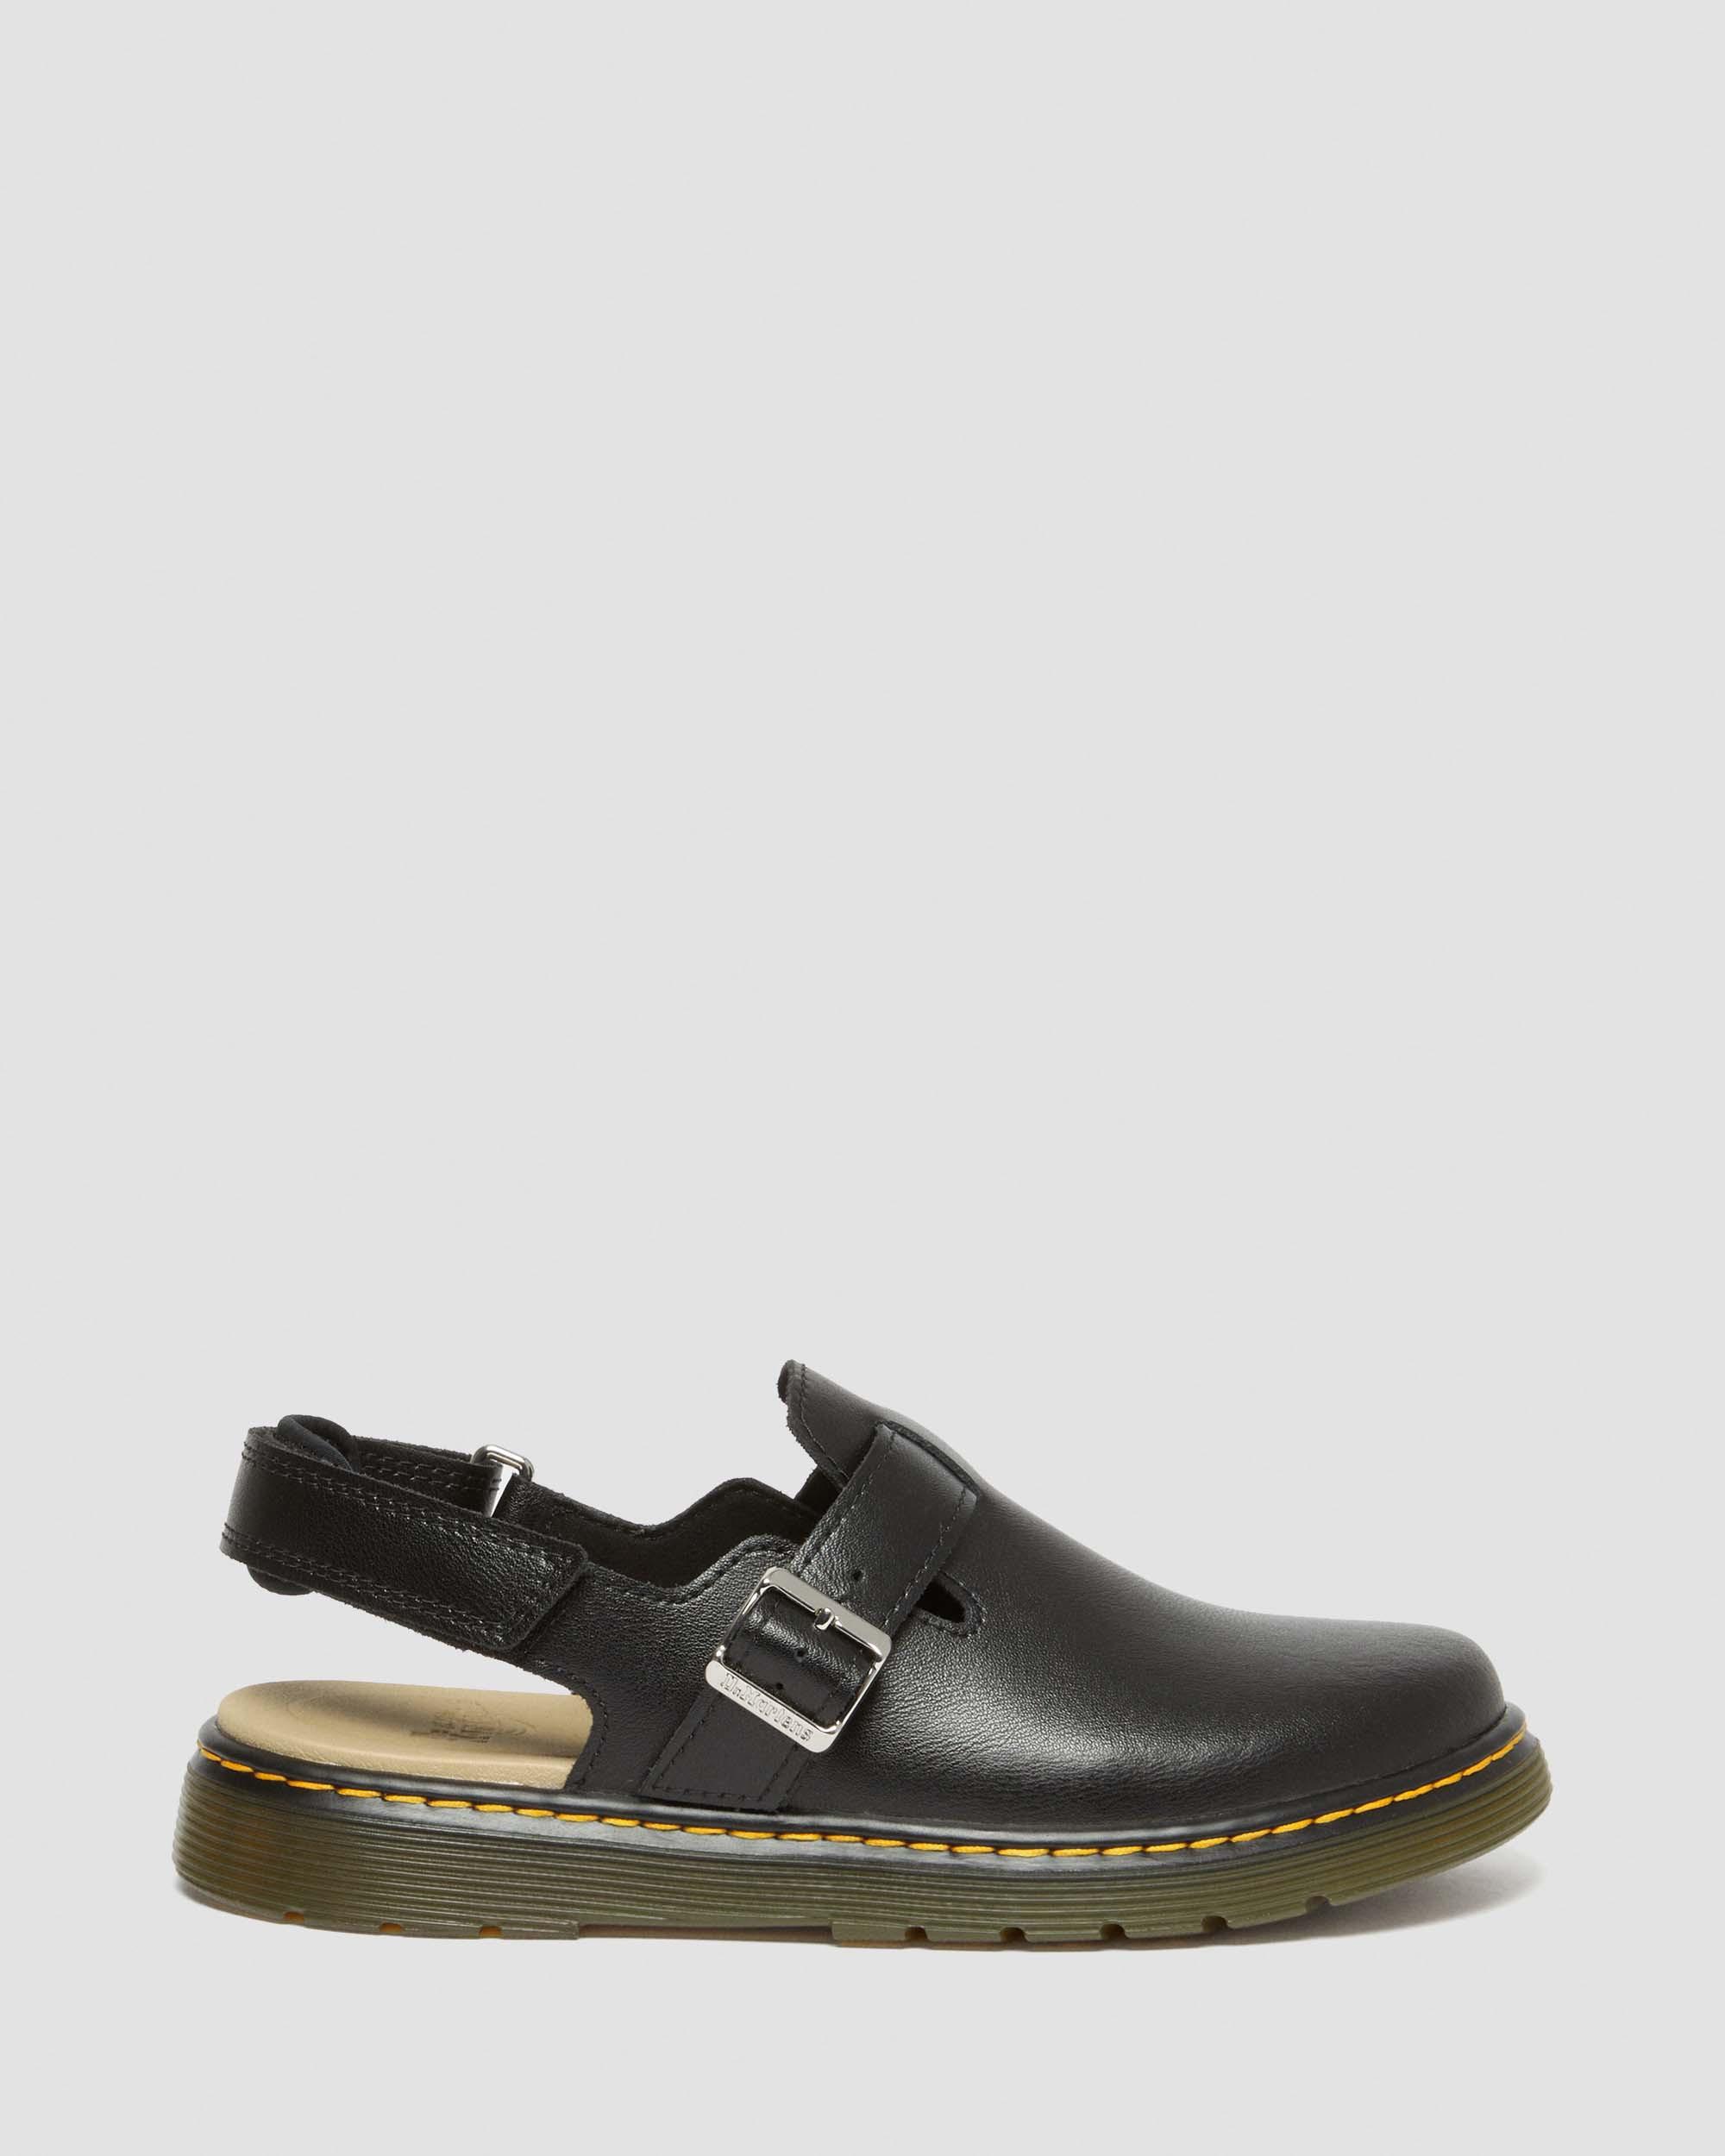 Youth Jorgie Leather Slingback Mules in Black | Dr. Martens